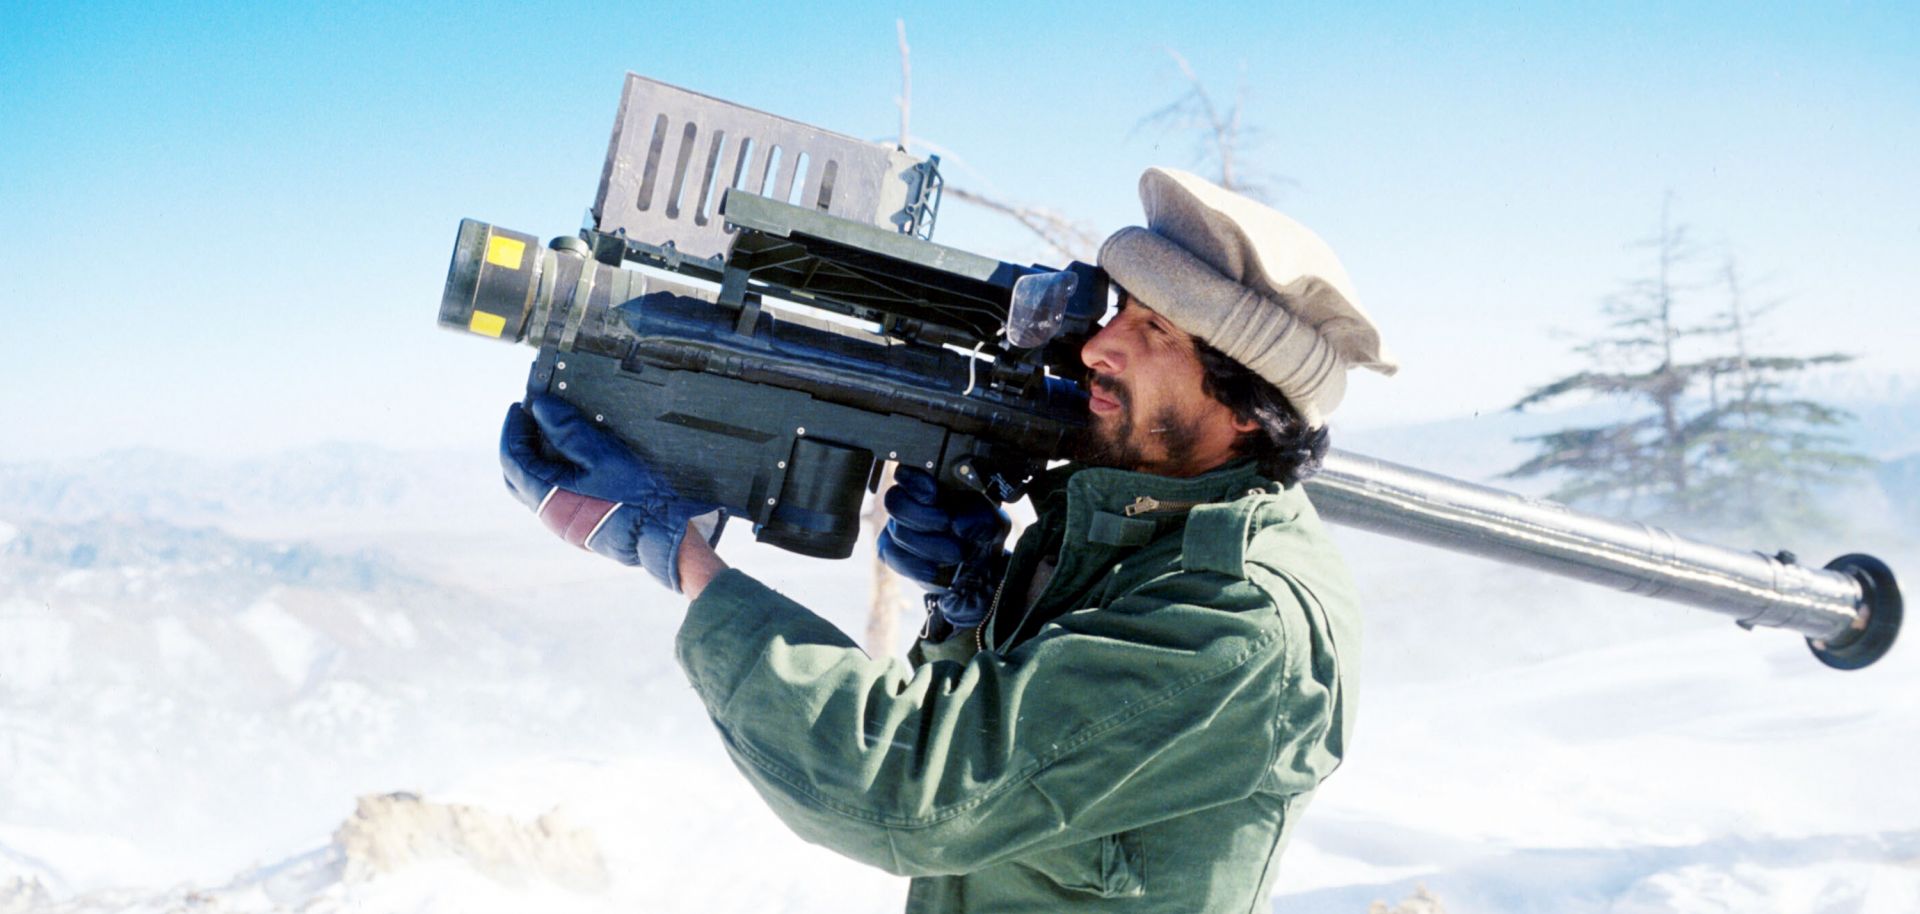 A man points a stinger missile into the air on a snowy mountain.